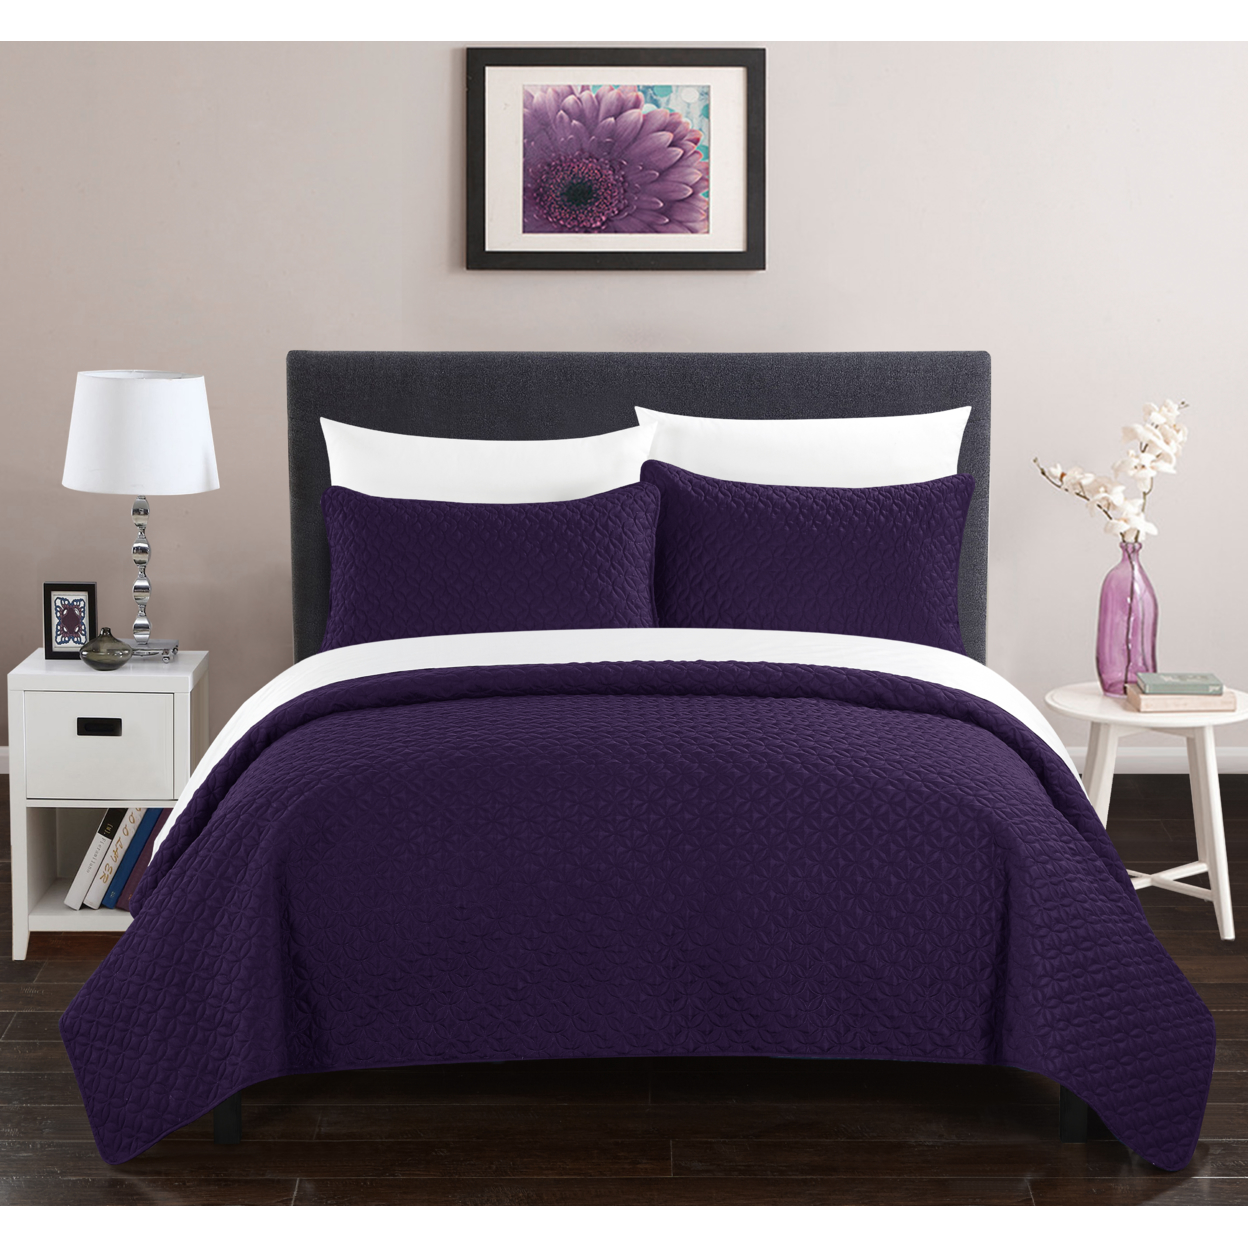 Gideon 3 Or 2 Piece Quilt Cover Set Rose Star Geometric Quilted Bedding - Purple, Queen